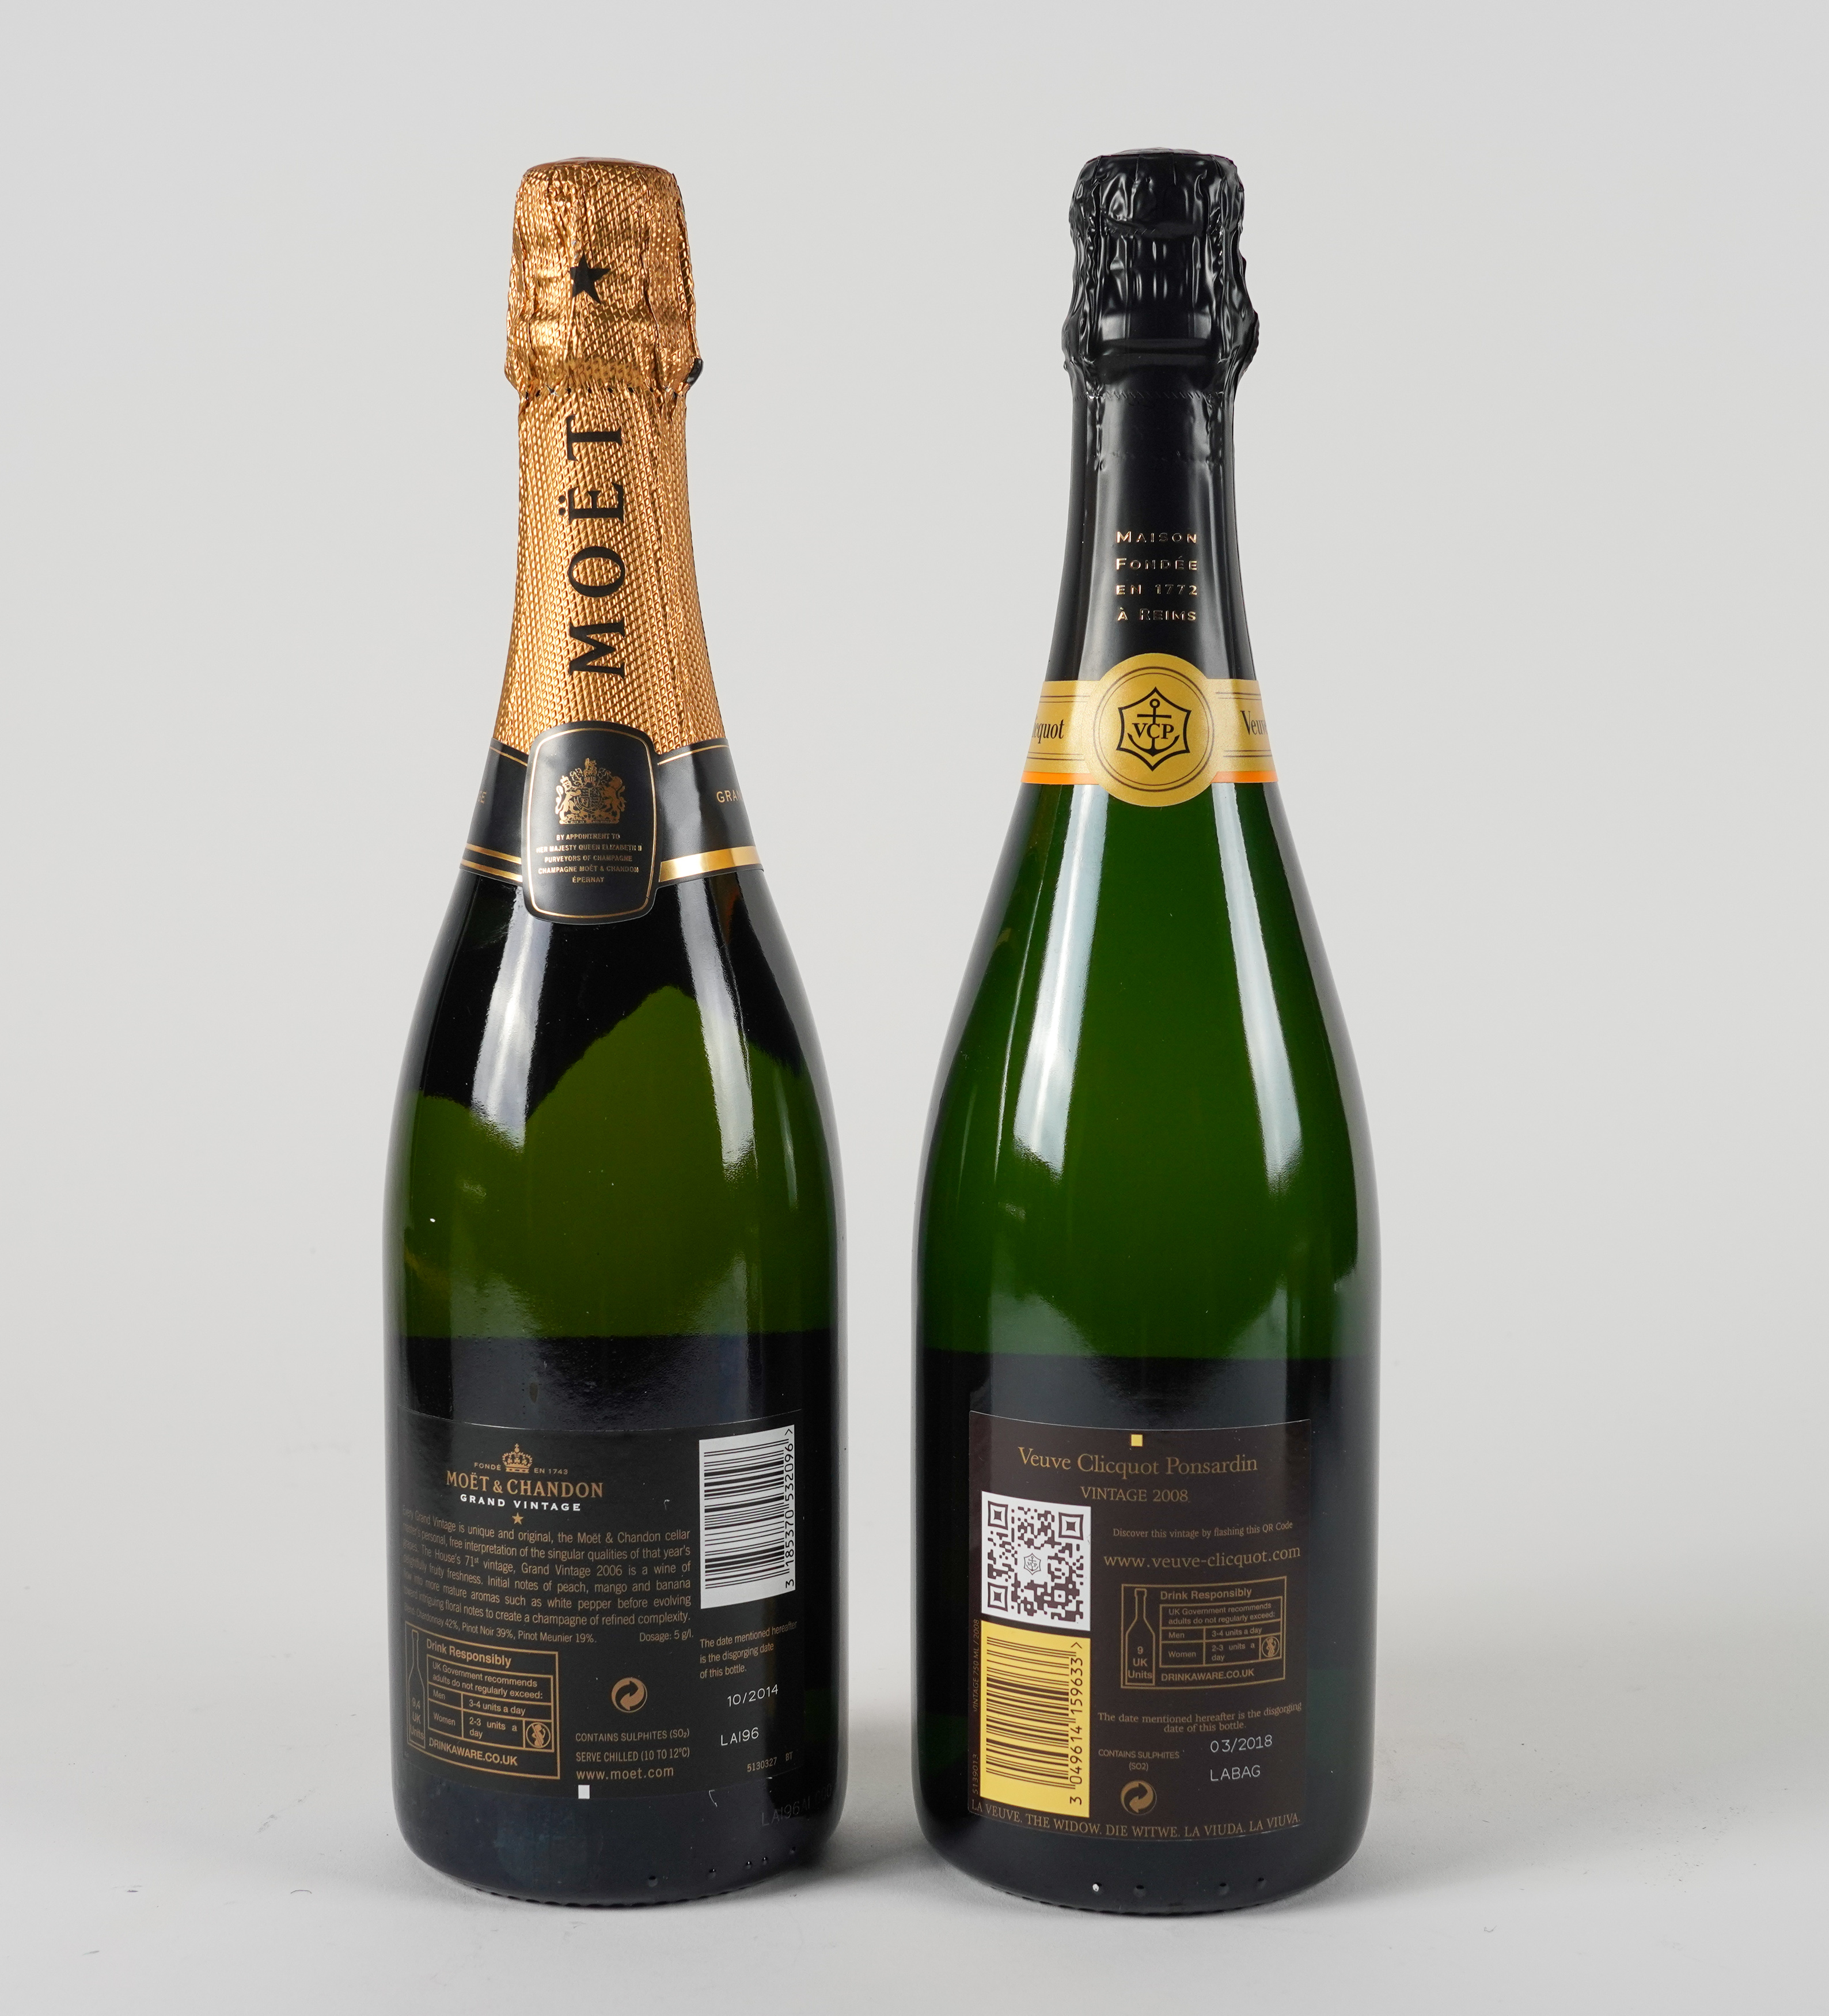 A BOTTLE OF VEUVE CLICQUOT CHAMPAGNE 2008 AND A BOTTLE OF MOET CHANDON 2006 (2) - Image 3 of 5